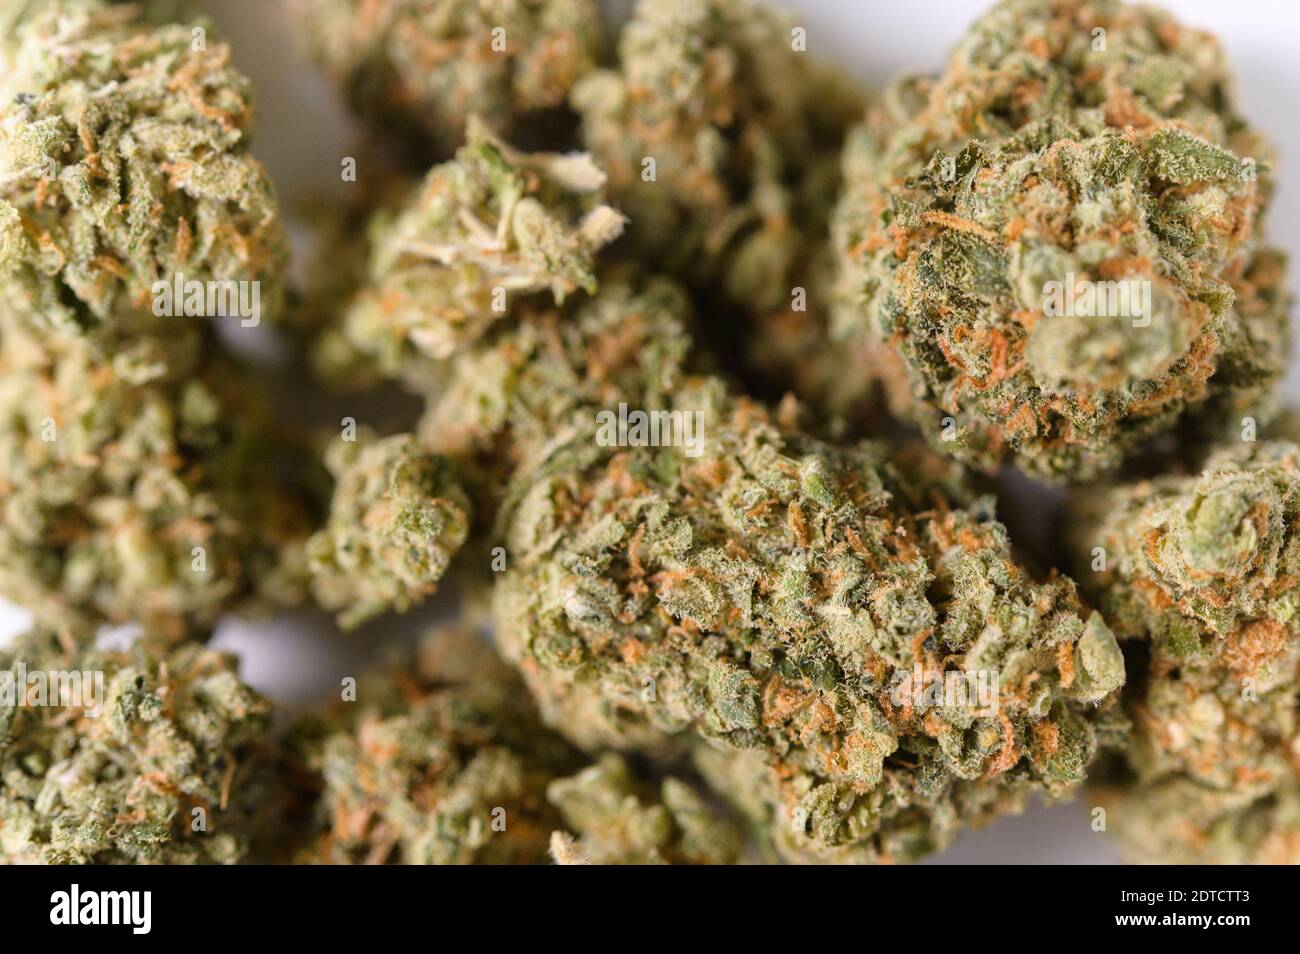 Close-up of cannabis buds Stock Photo